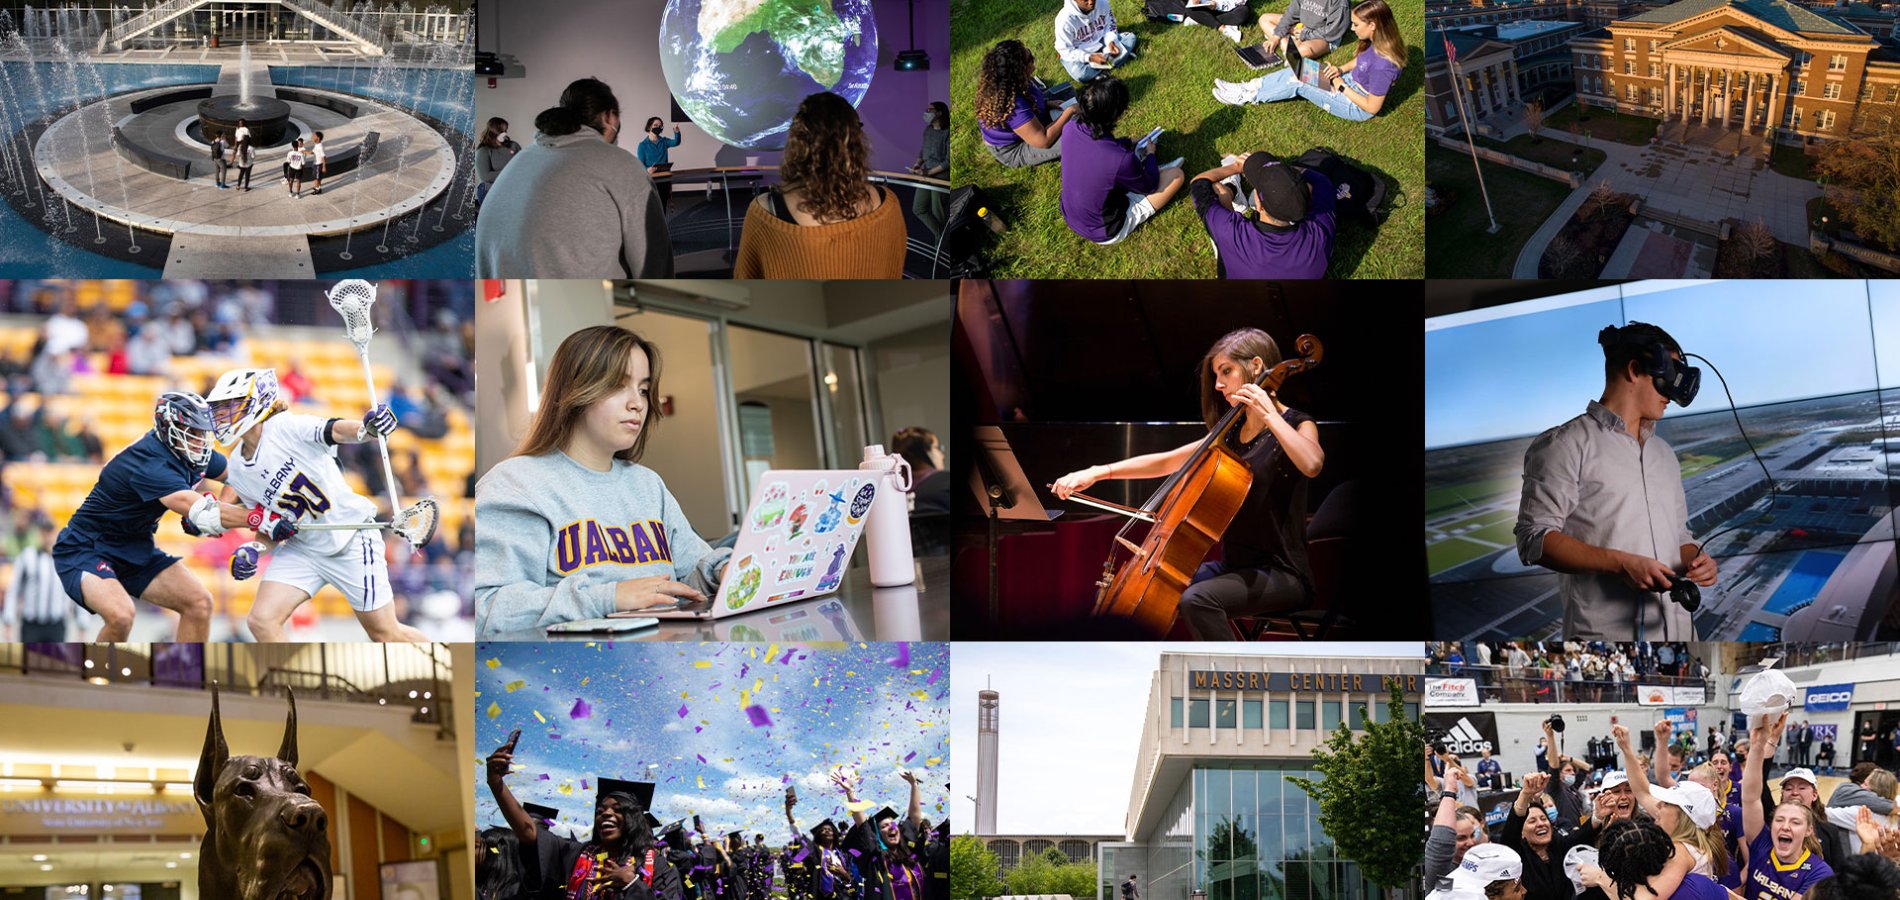 Many pictures of students participating in various activities around campus.